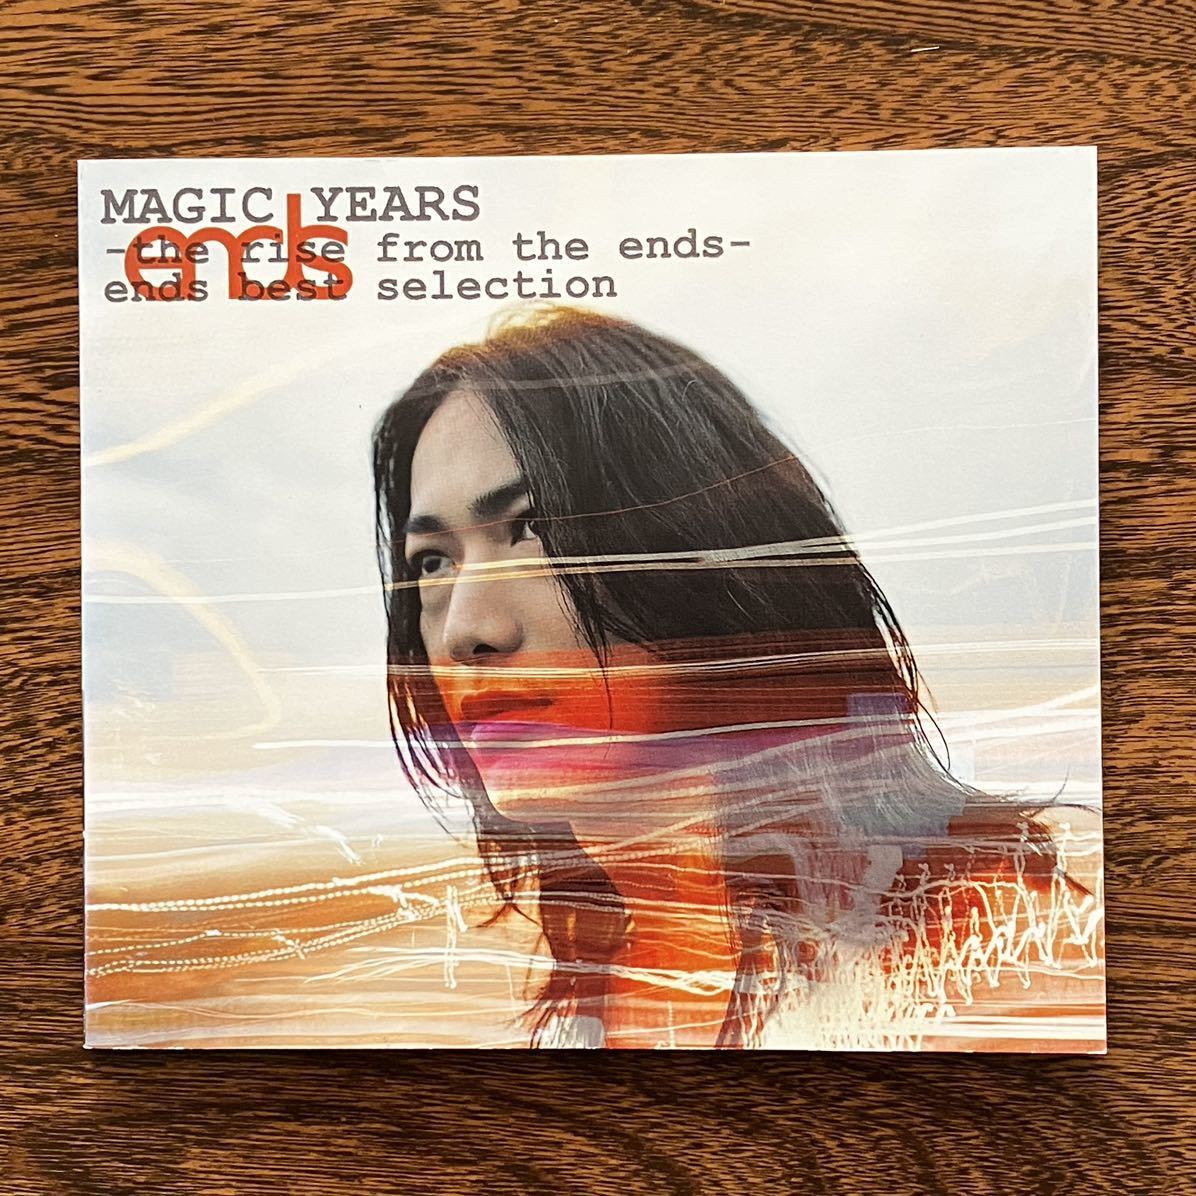 12【2CD・初回限定盤】 ends エンズ MAGIC YEARS -the rise from the ends- ends best selection 2枚組 SPブック付 ソフトバレエ 中古品_画像6